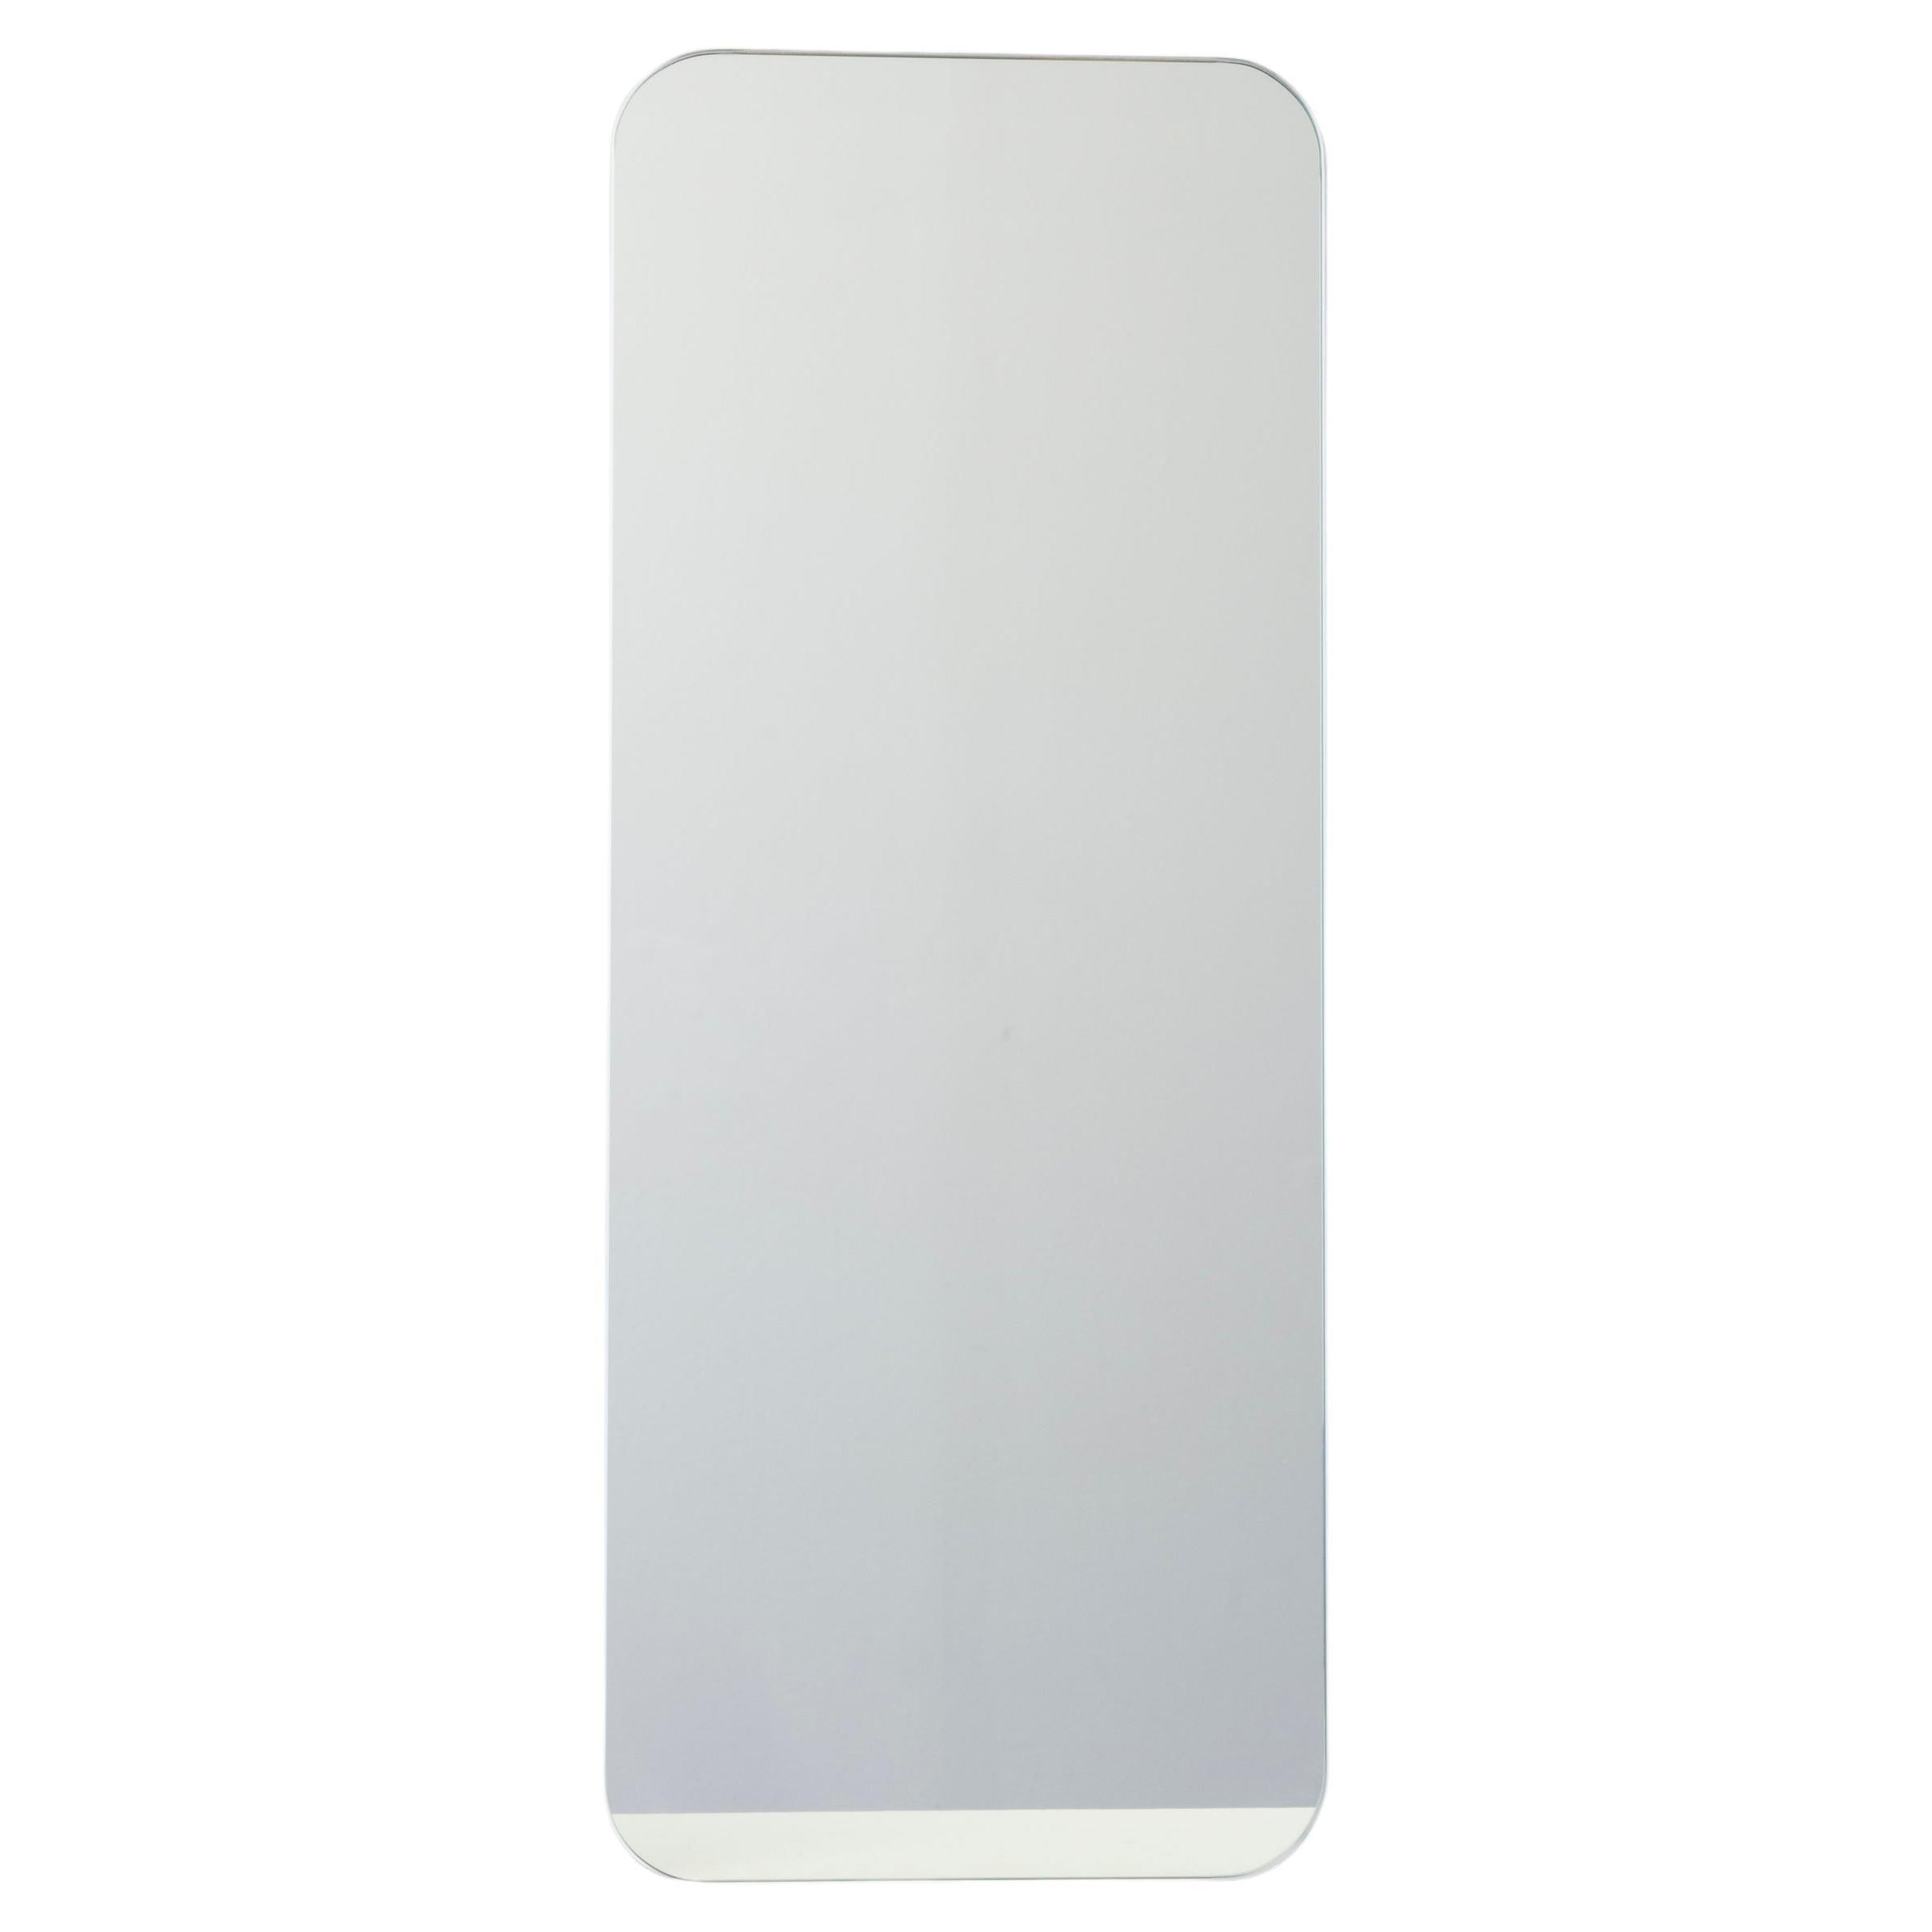 Quadris Rectangular Contemporary Frameless Mirror with Floating Effect, Large For Sale